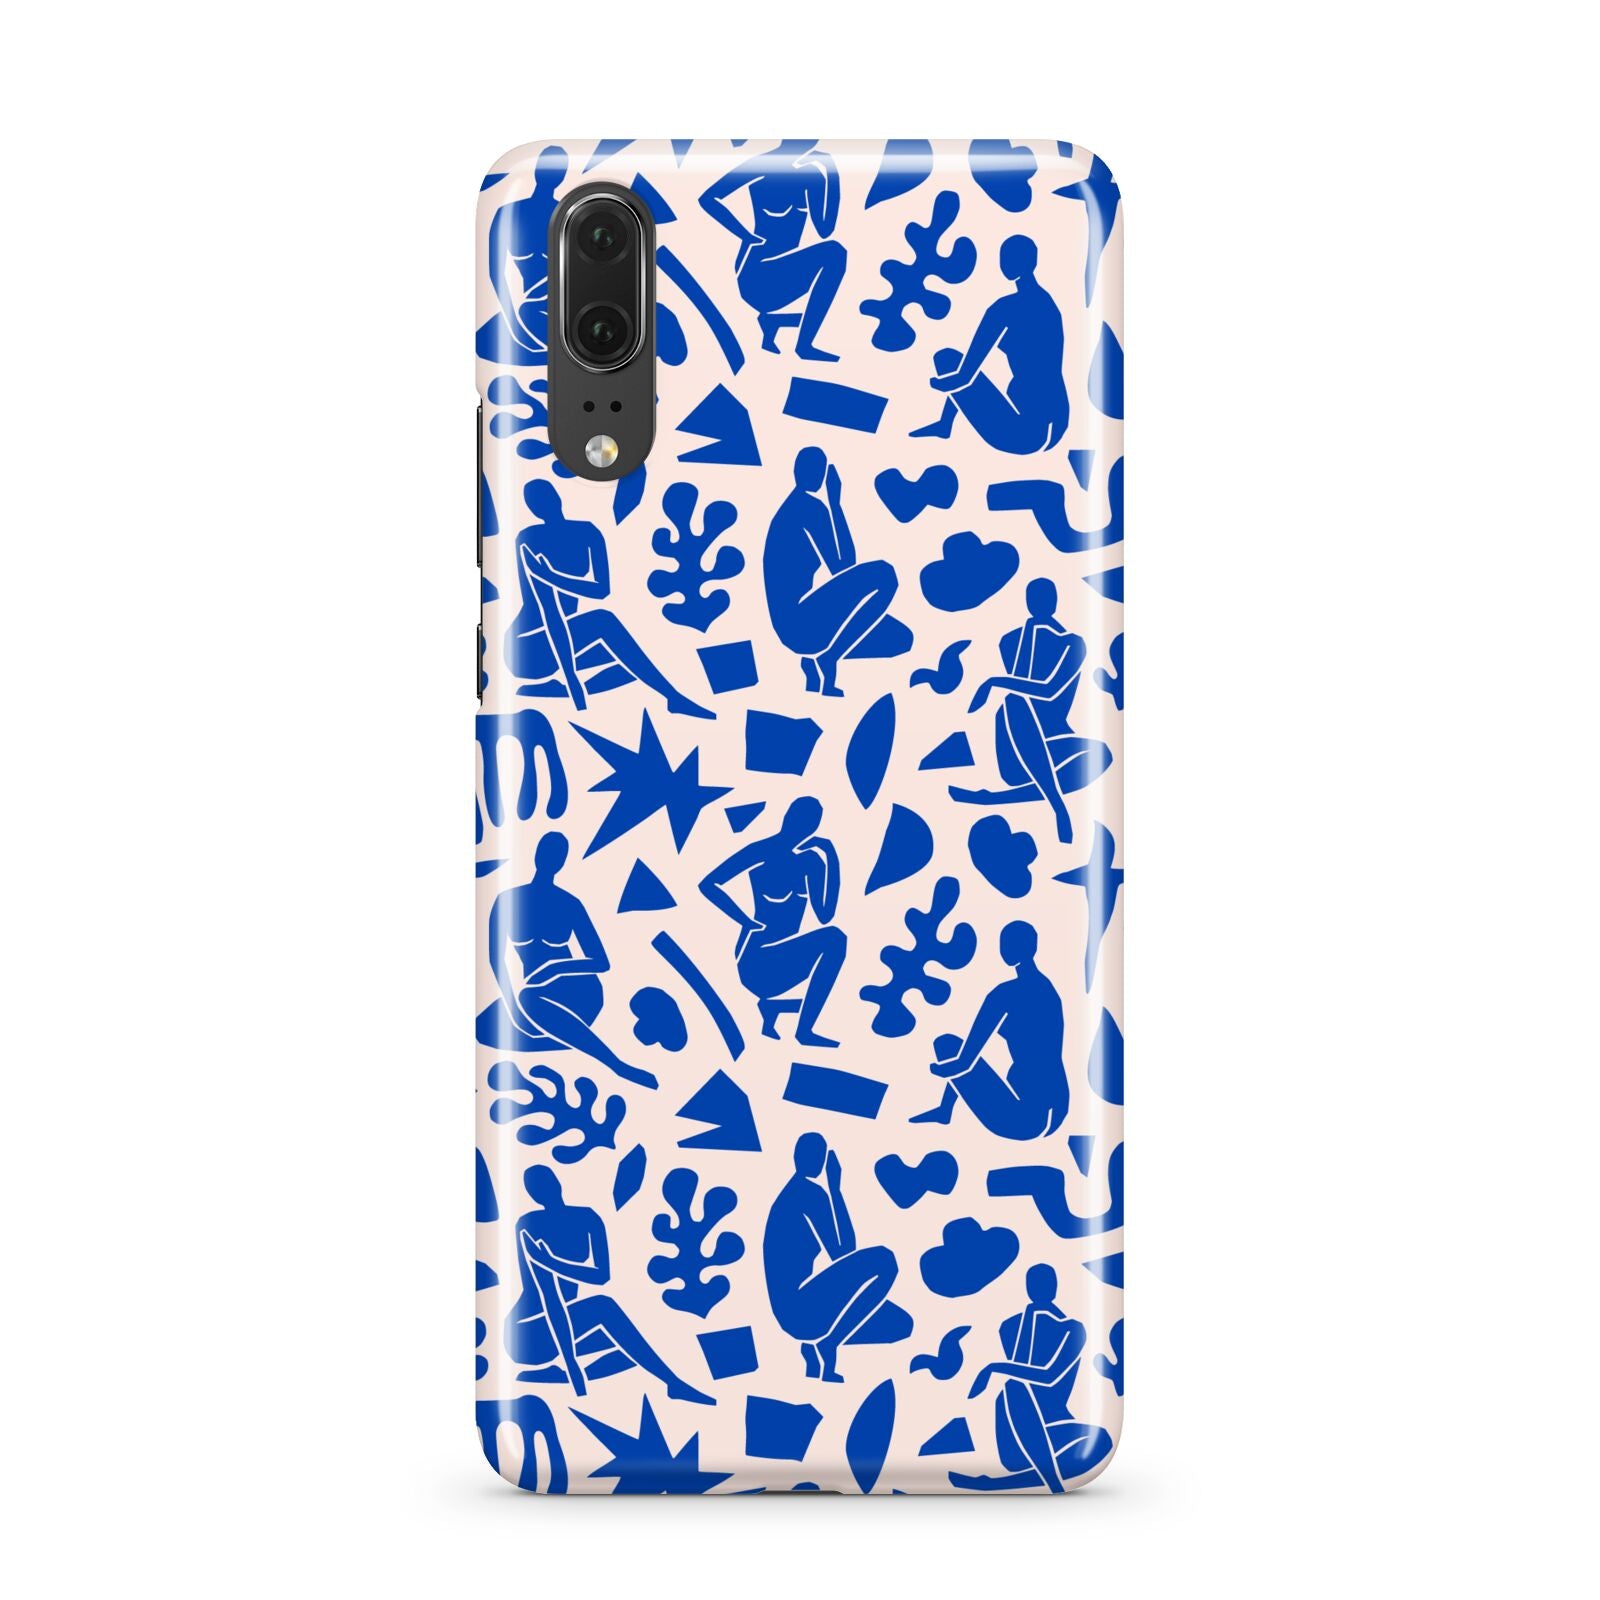 Abstract Art Huawei P20 Phone Case